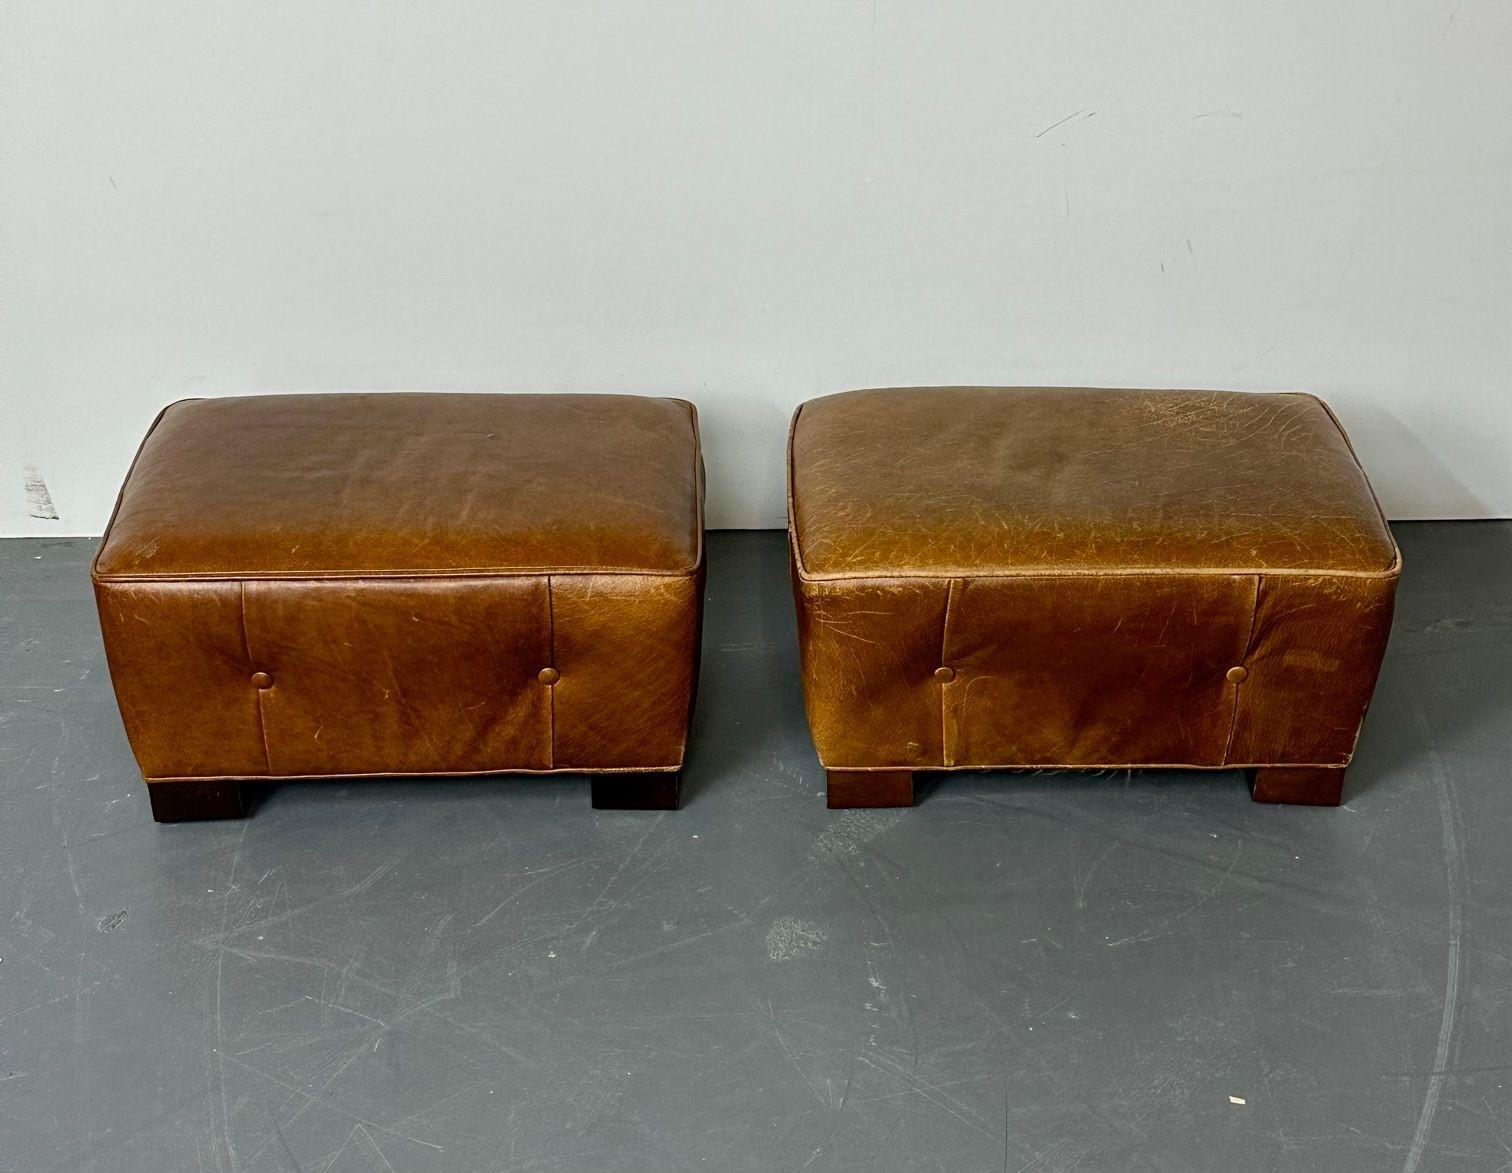 Pair of French Art Deco Style Distressed Leather Rectangular Ottomans, Low Stool
 
A rare and hard to find pair of Art Deco French ottomans or footstools with button pleated sides and mahogany feet. This fine pair will not be seen elsewhere; a